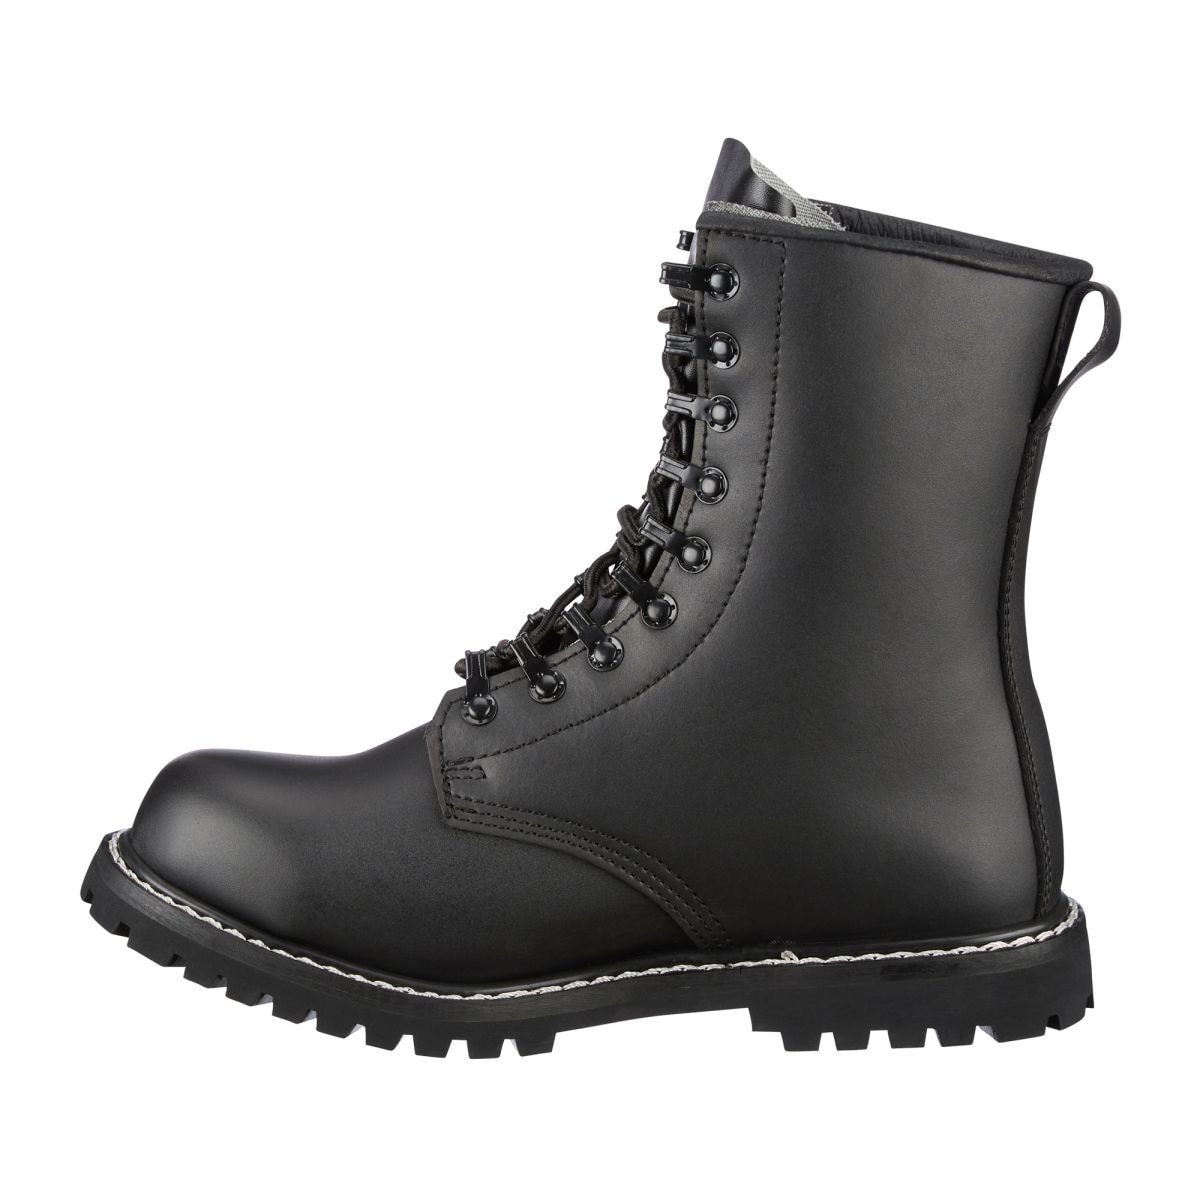 Purchase the Parachute Boots With Steel Toe by ASMC